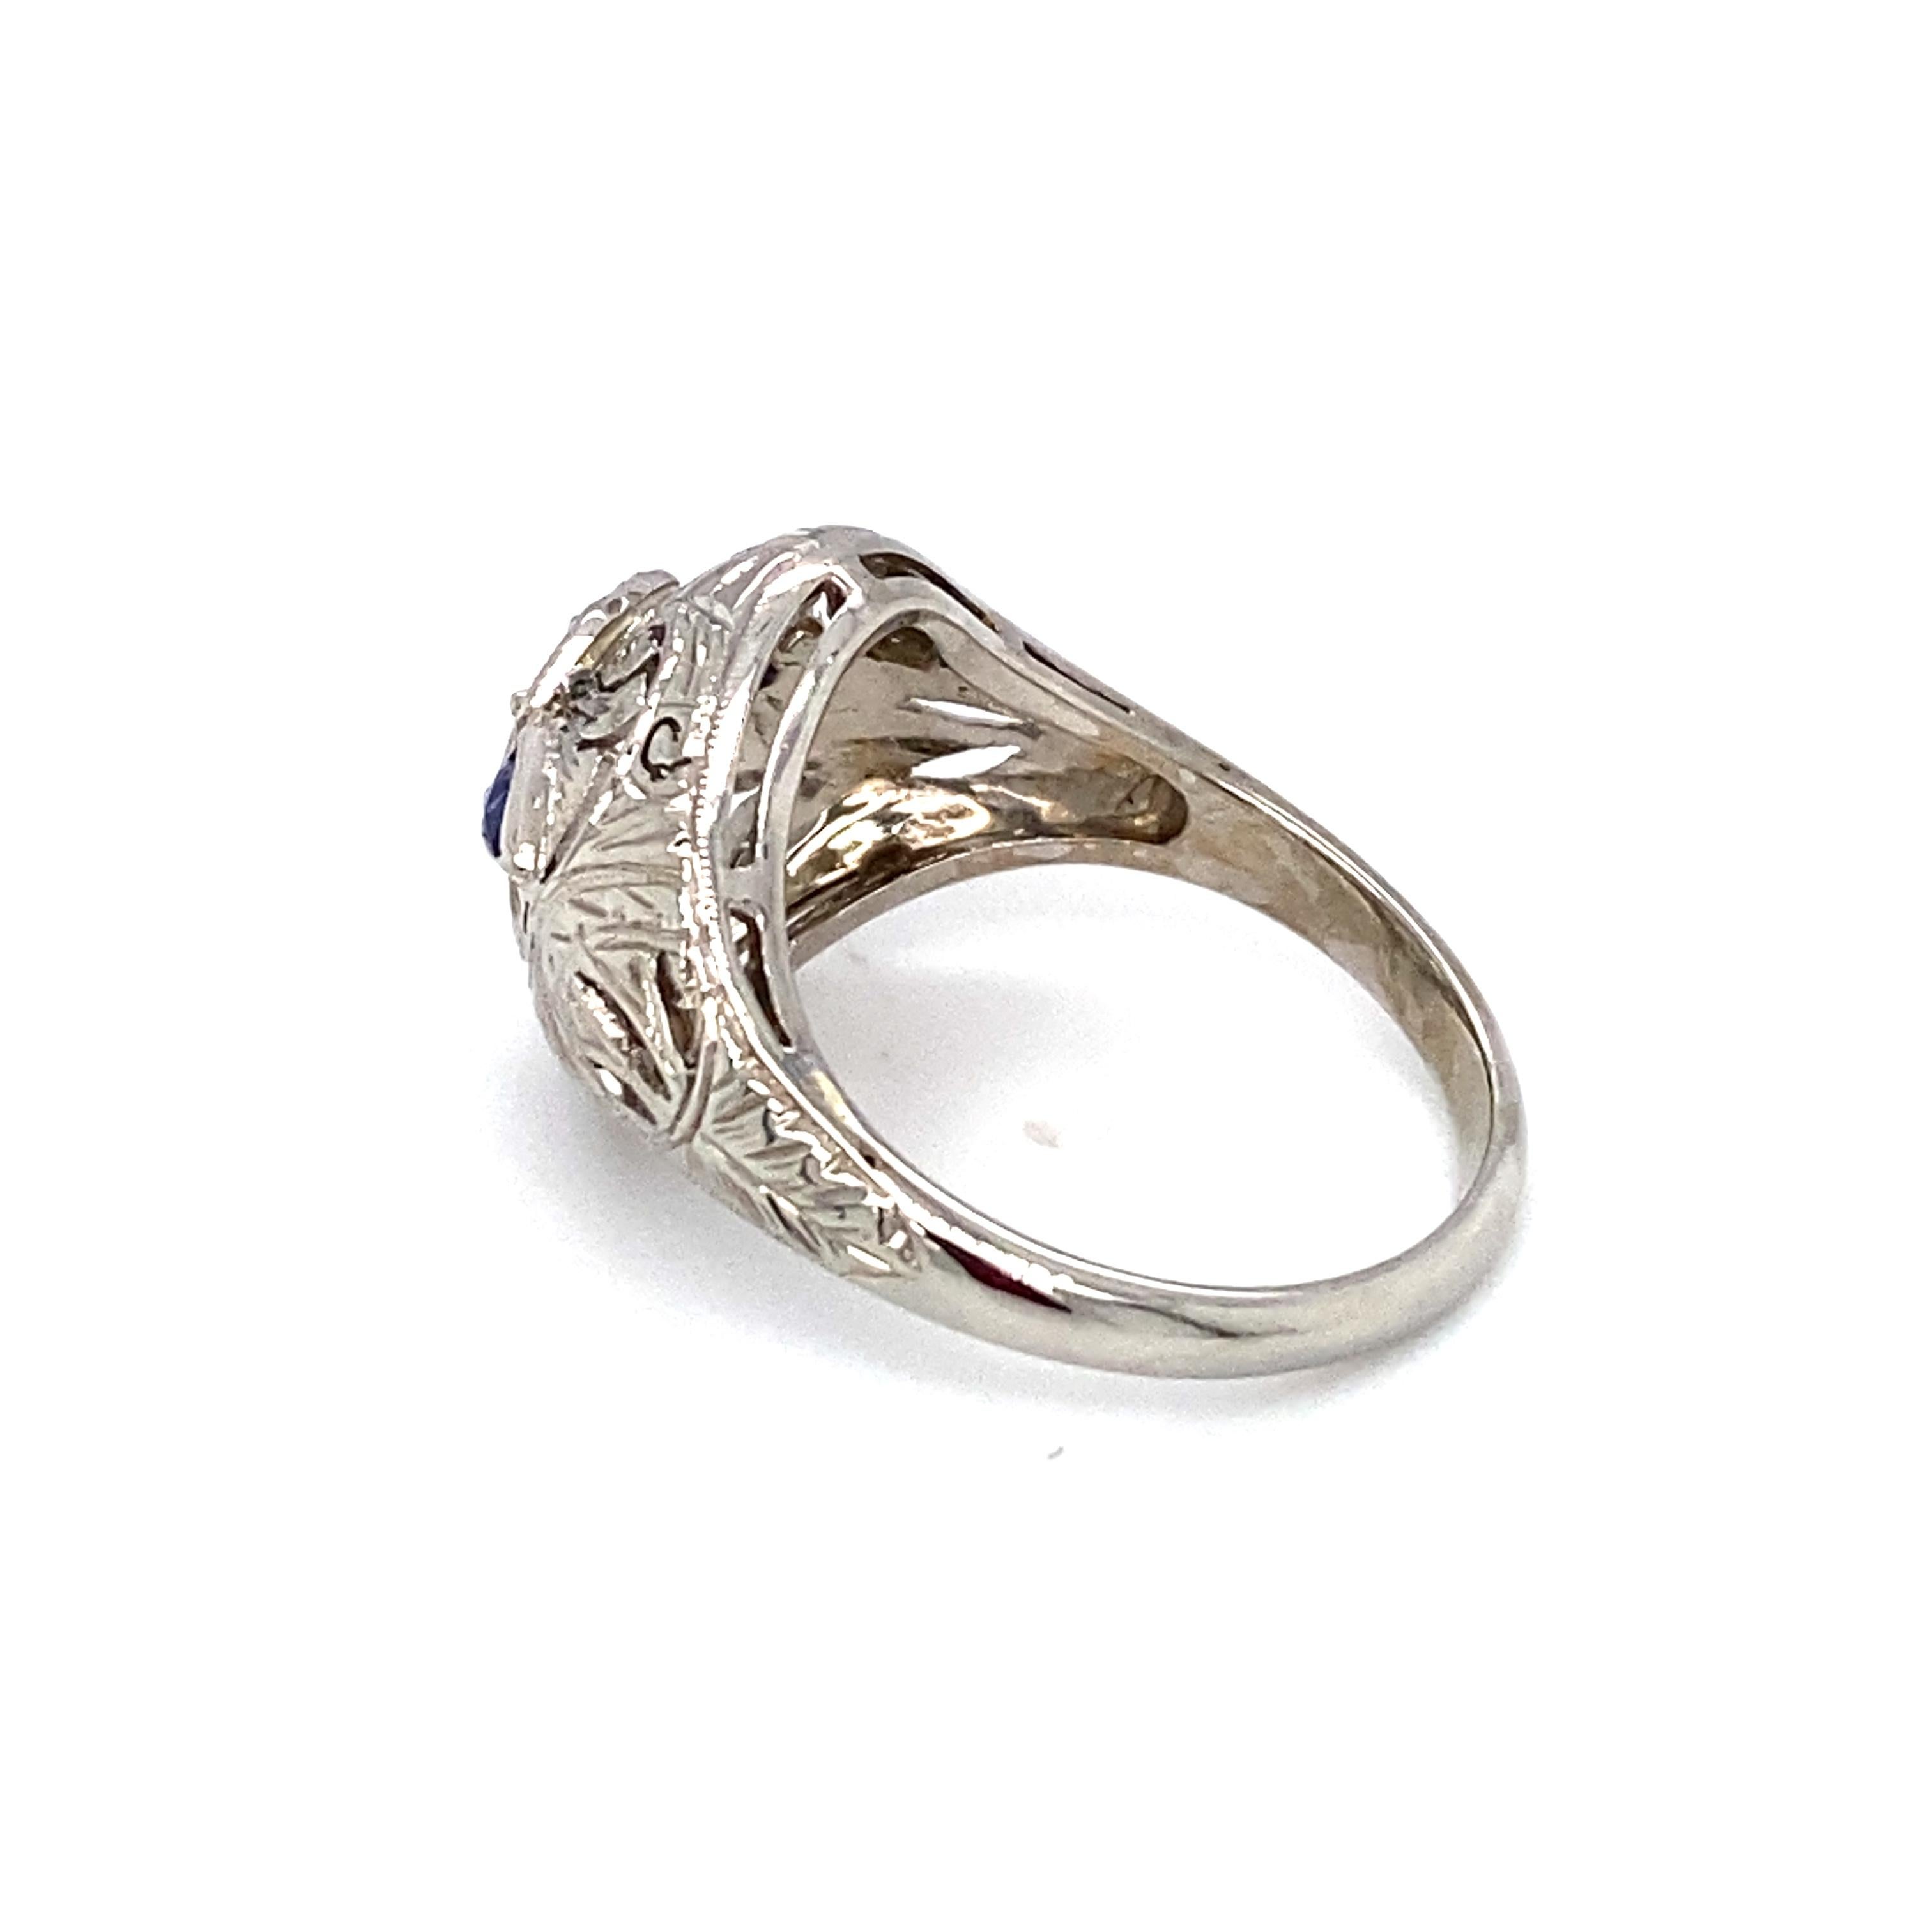 Item Details: 
A unique piece dating from the 1920s, this ring features a center diamond and sapphire accents, a true art deco masterpiece! 

Circa: 1920s
Metal Type: Platinum
Weight: 4.2 grams
Size: US 6, resizable

Diamond Details:
Carat: 0.65